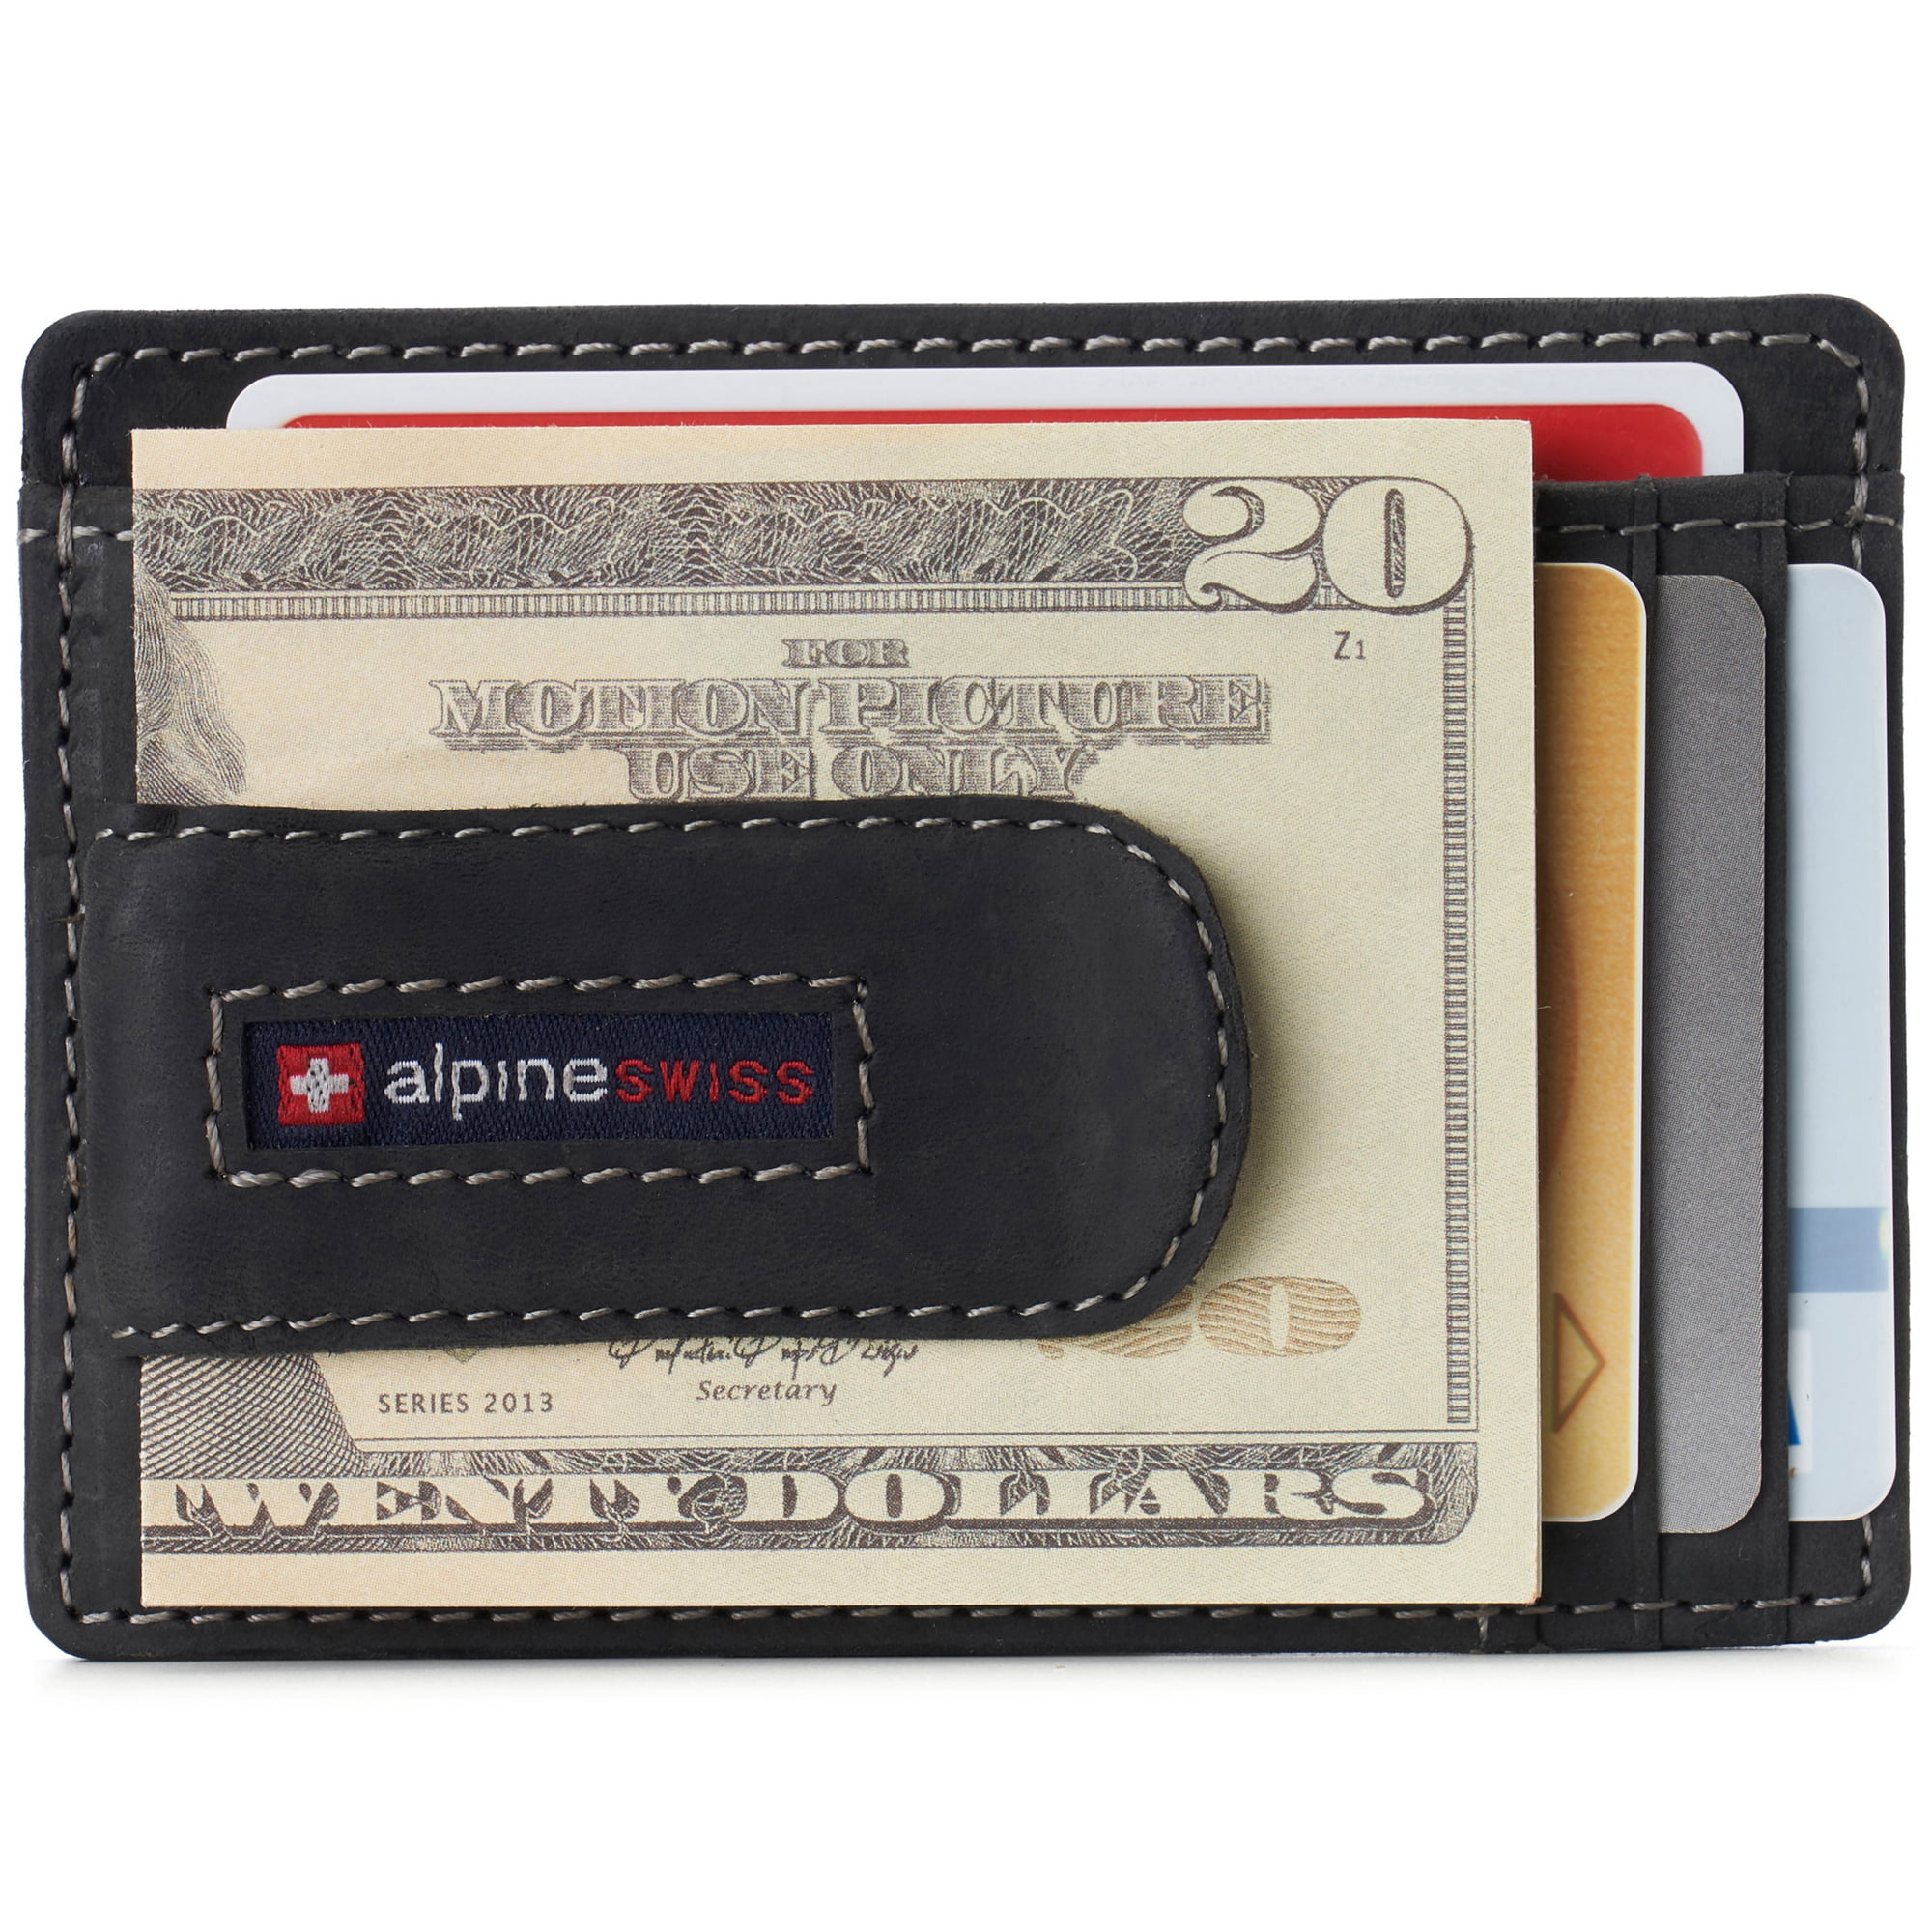 Details about   Mens Wallet Bifold Genuine Leather RFID Blocking Slim Wallets with Money Clip US 